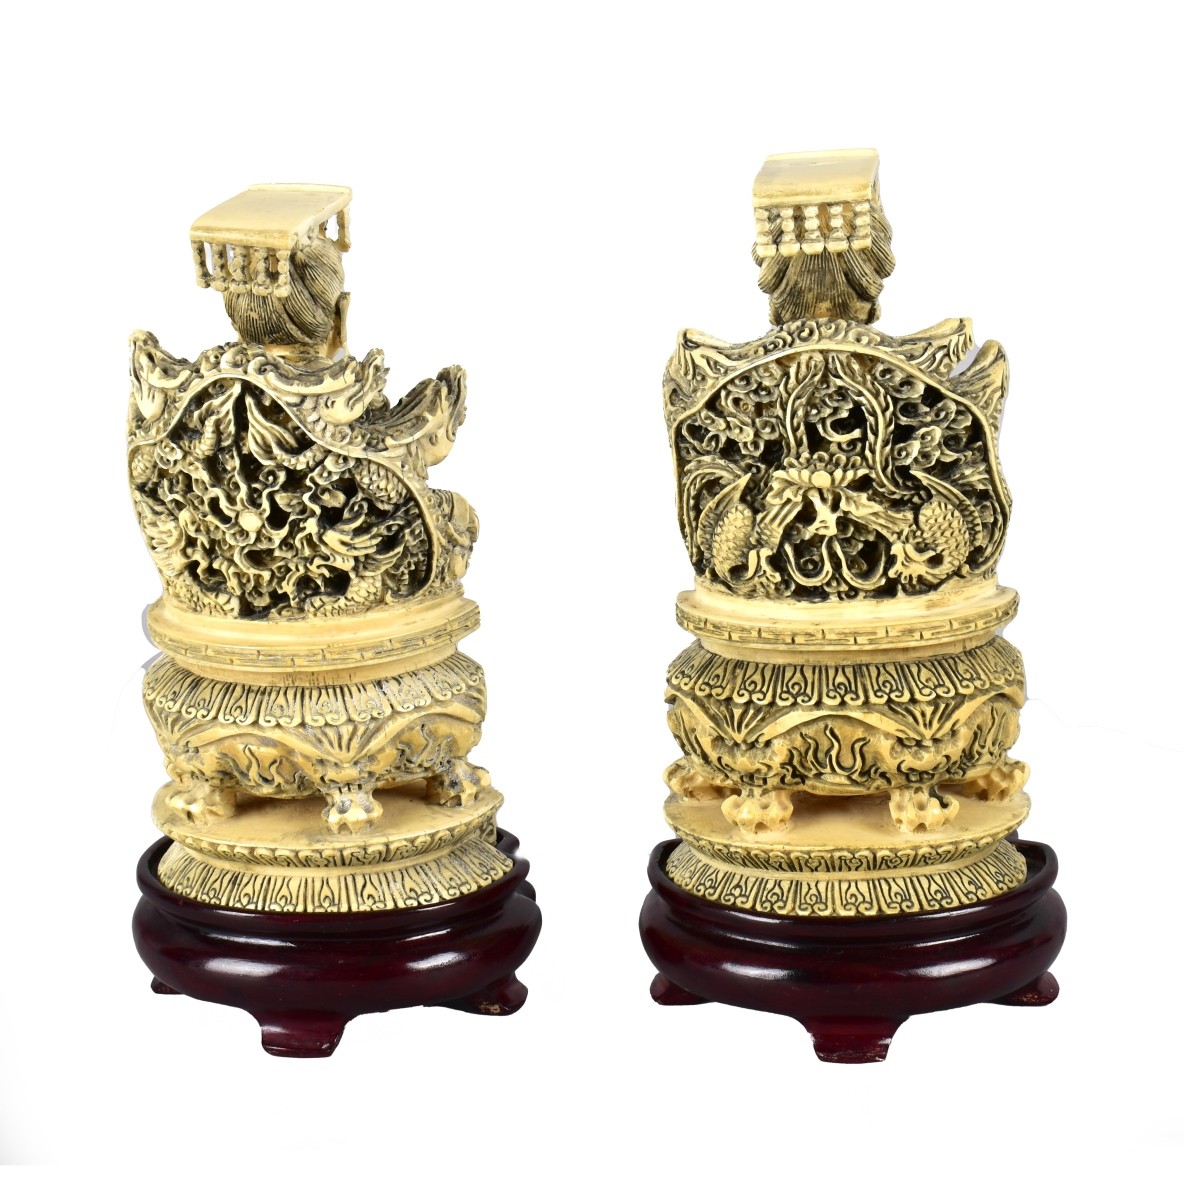 Chinese Carved Emperor and Empress